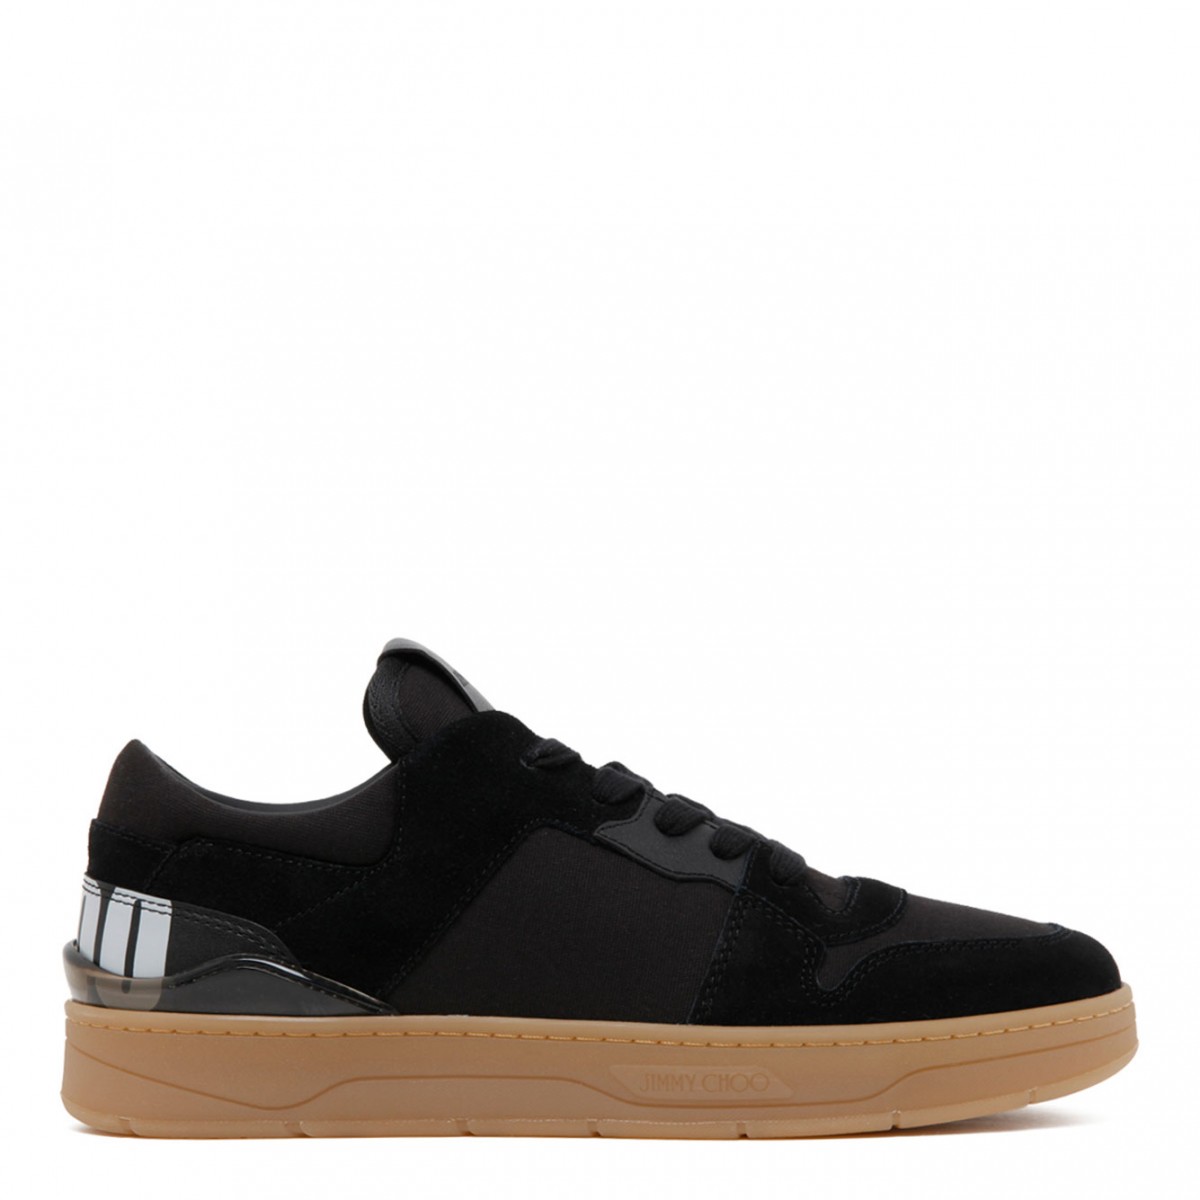 Jimmy Choo Black, Honey and Brown Calf Leather Florent Low-Top Sneakers.